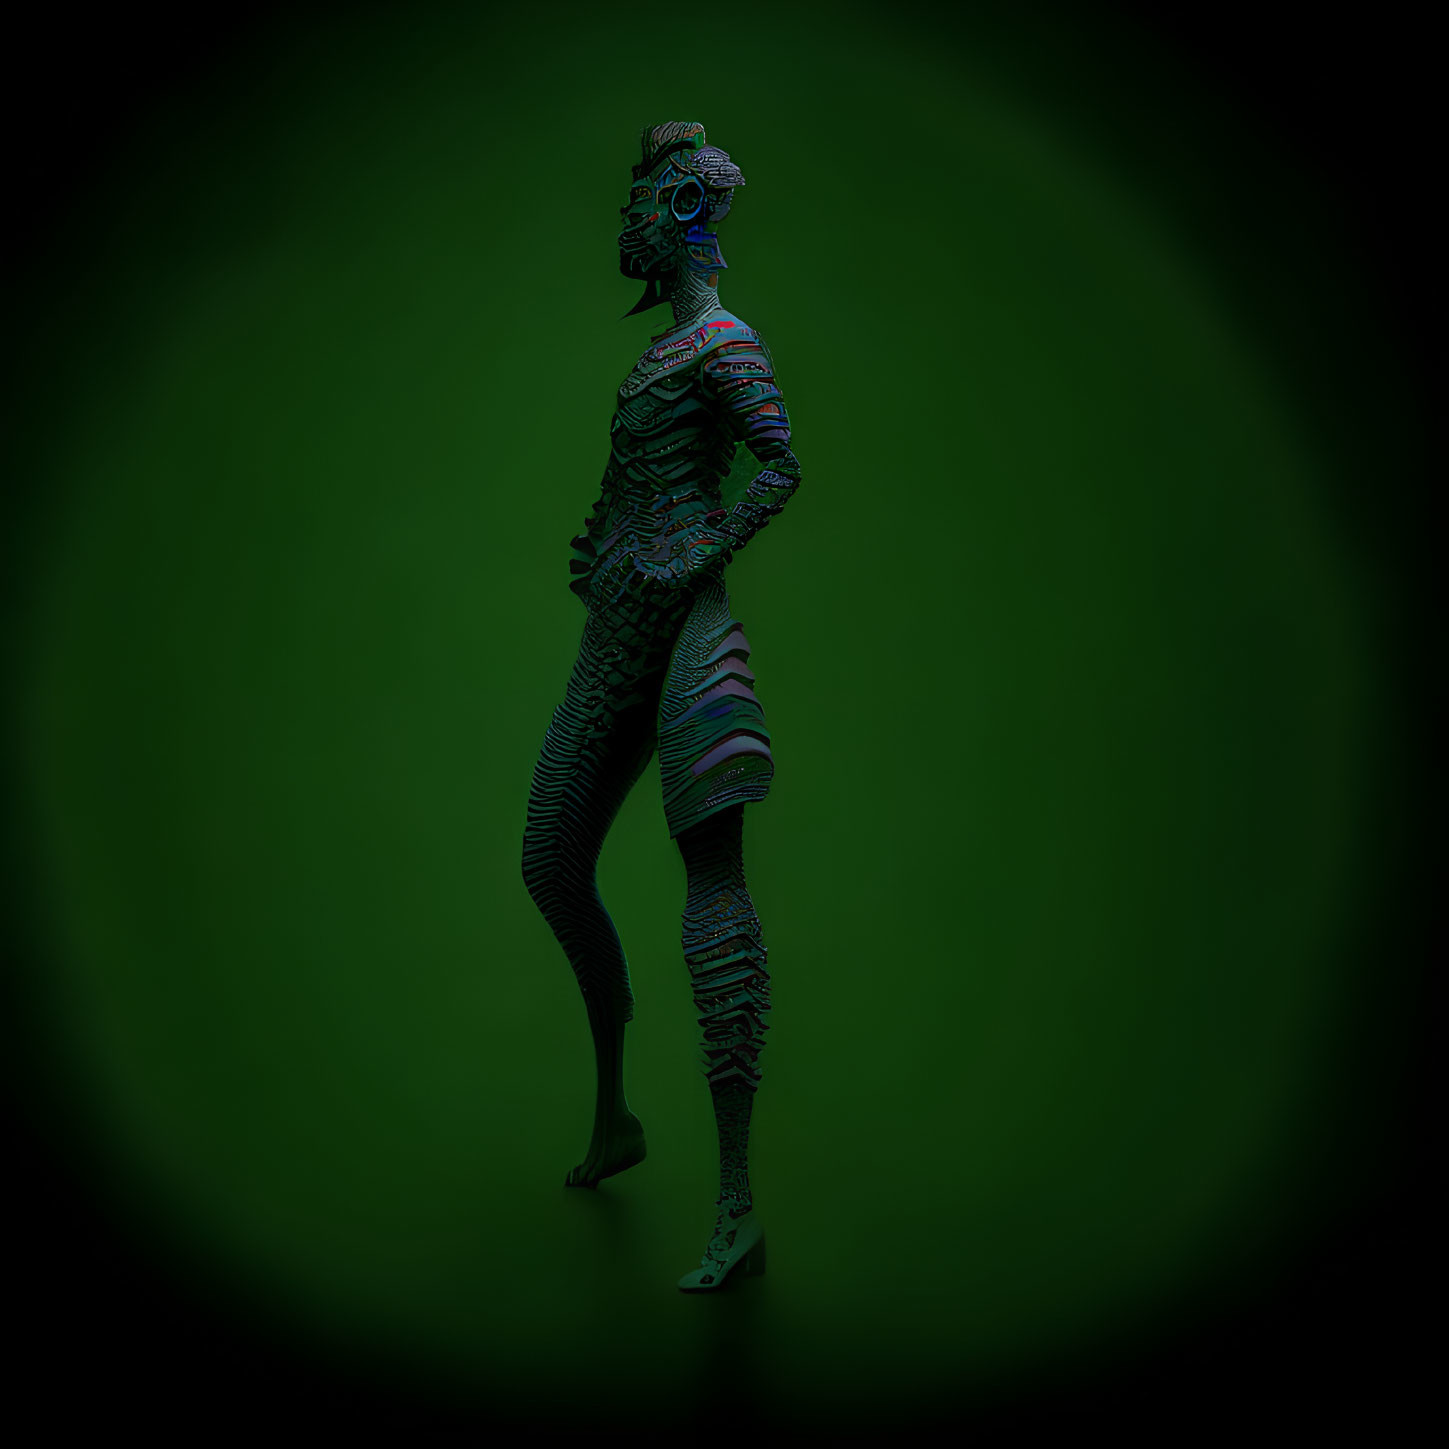 Intricate digital circuit patterns on figure against green background